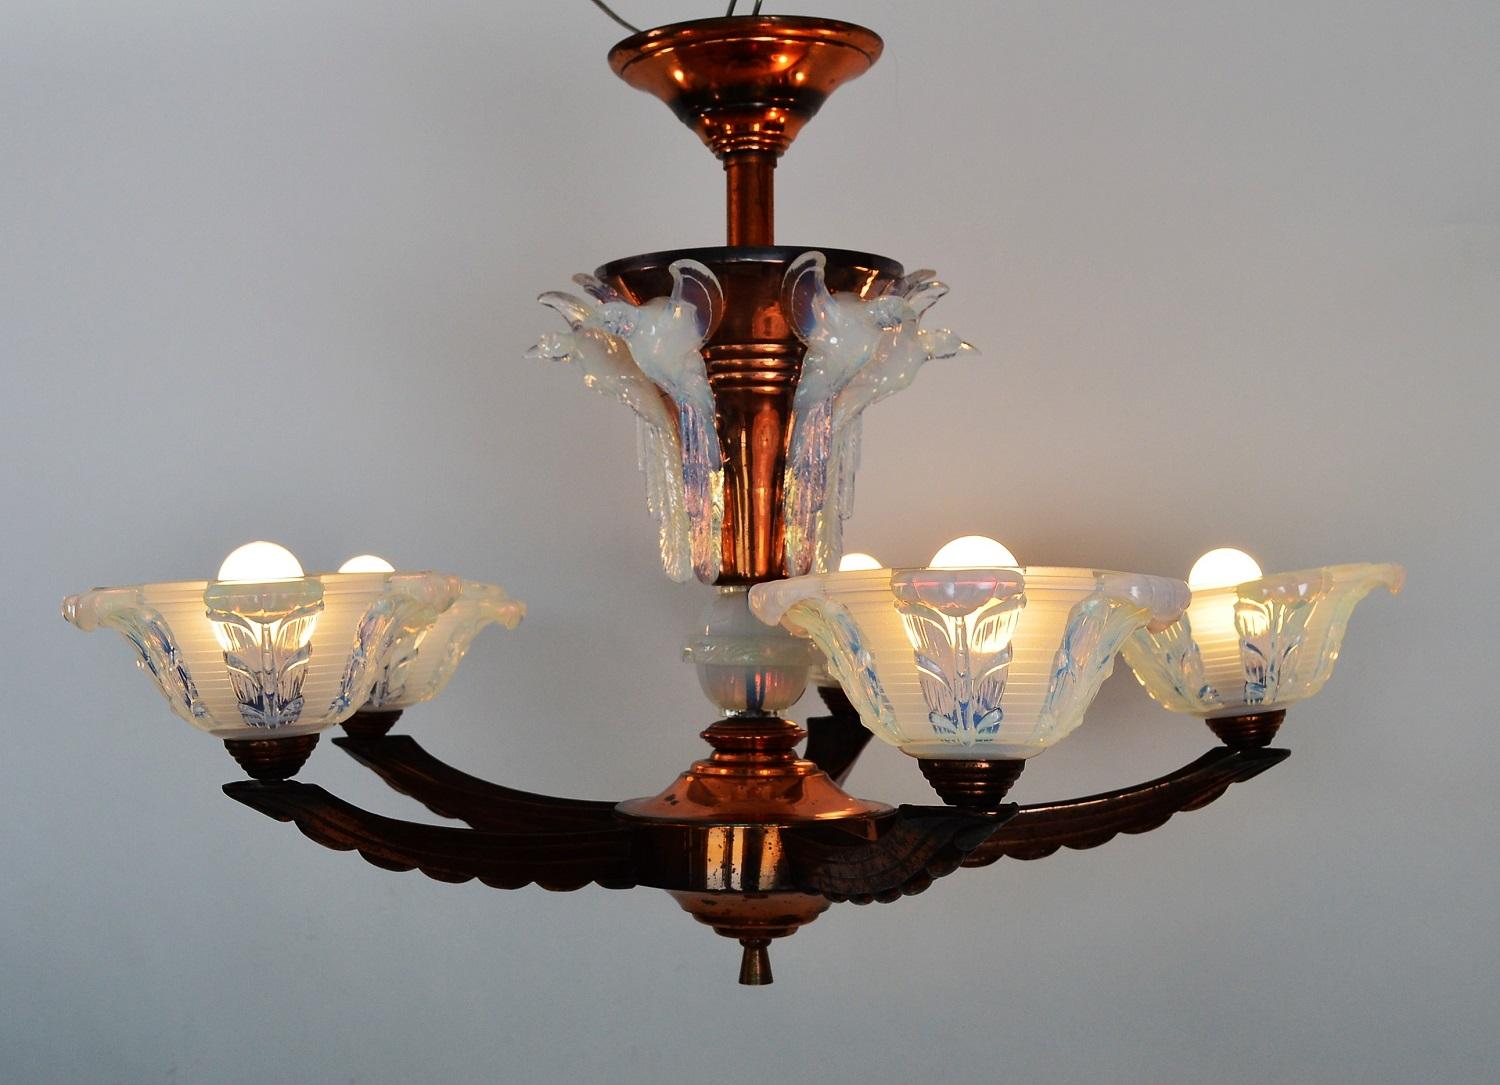 Magnificent French five-arm chandelier made of copper with stunning opalescent glasses.
Produced from Ezan in the 1930s, France.
The chandelier has opalescent flying bird figurines around the upper part and light holder bowls mounted at the five